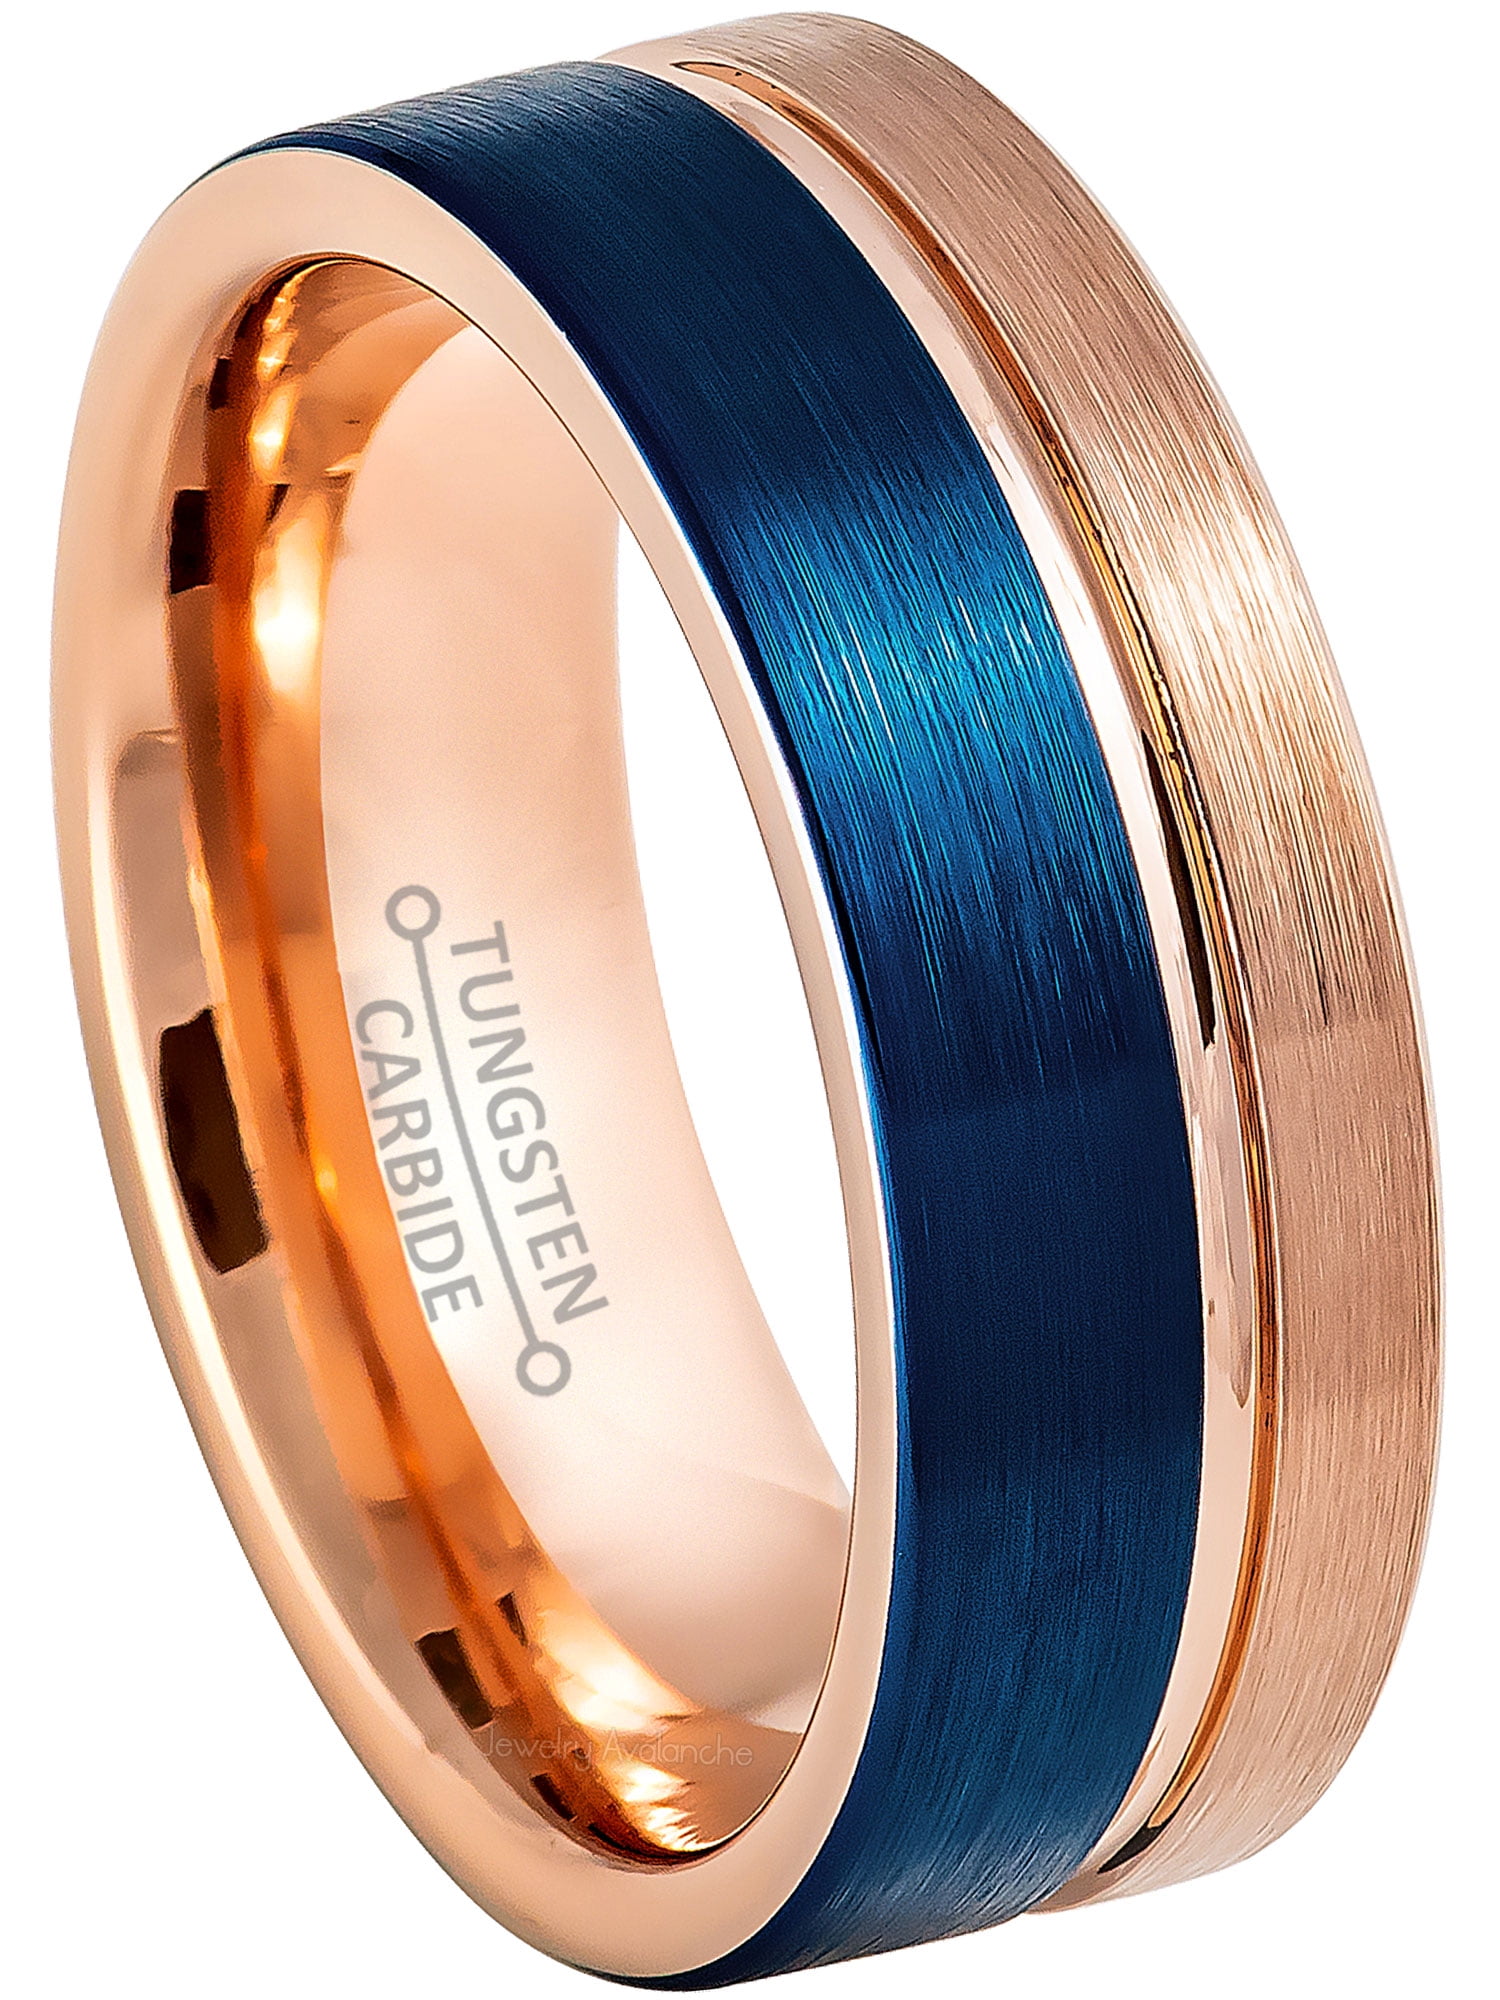 Gold Tone Grooved Stainless Steel Anniversary Engagement Band Unisex Ring Blue 